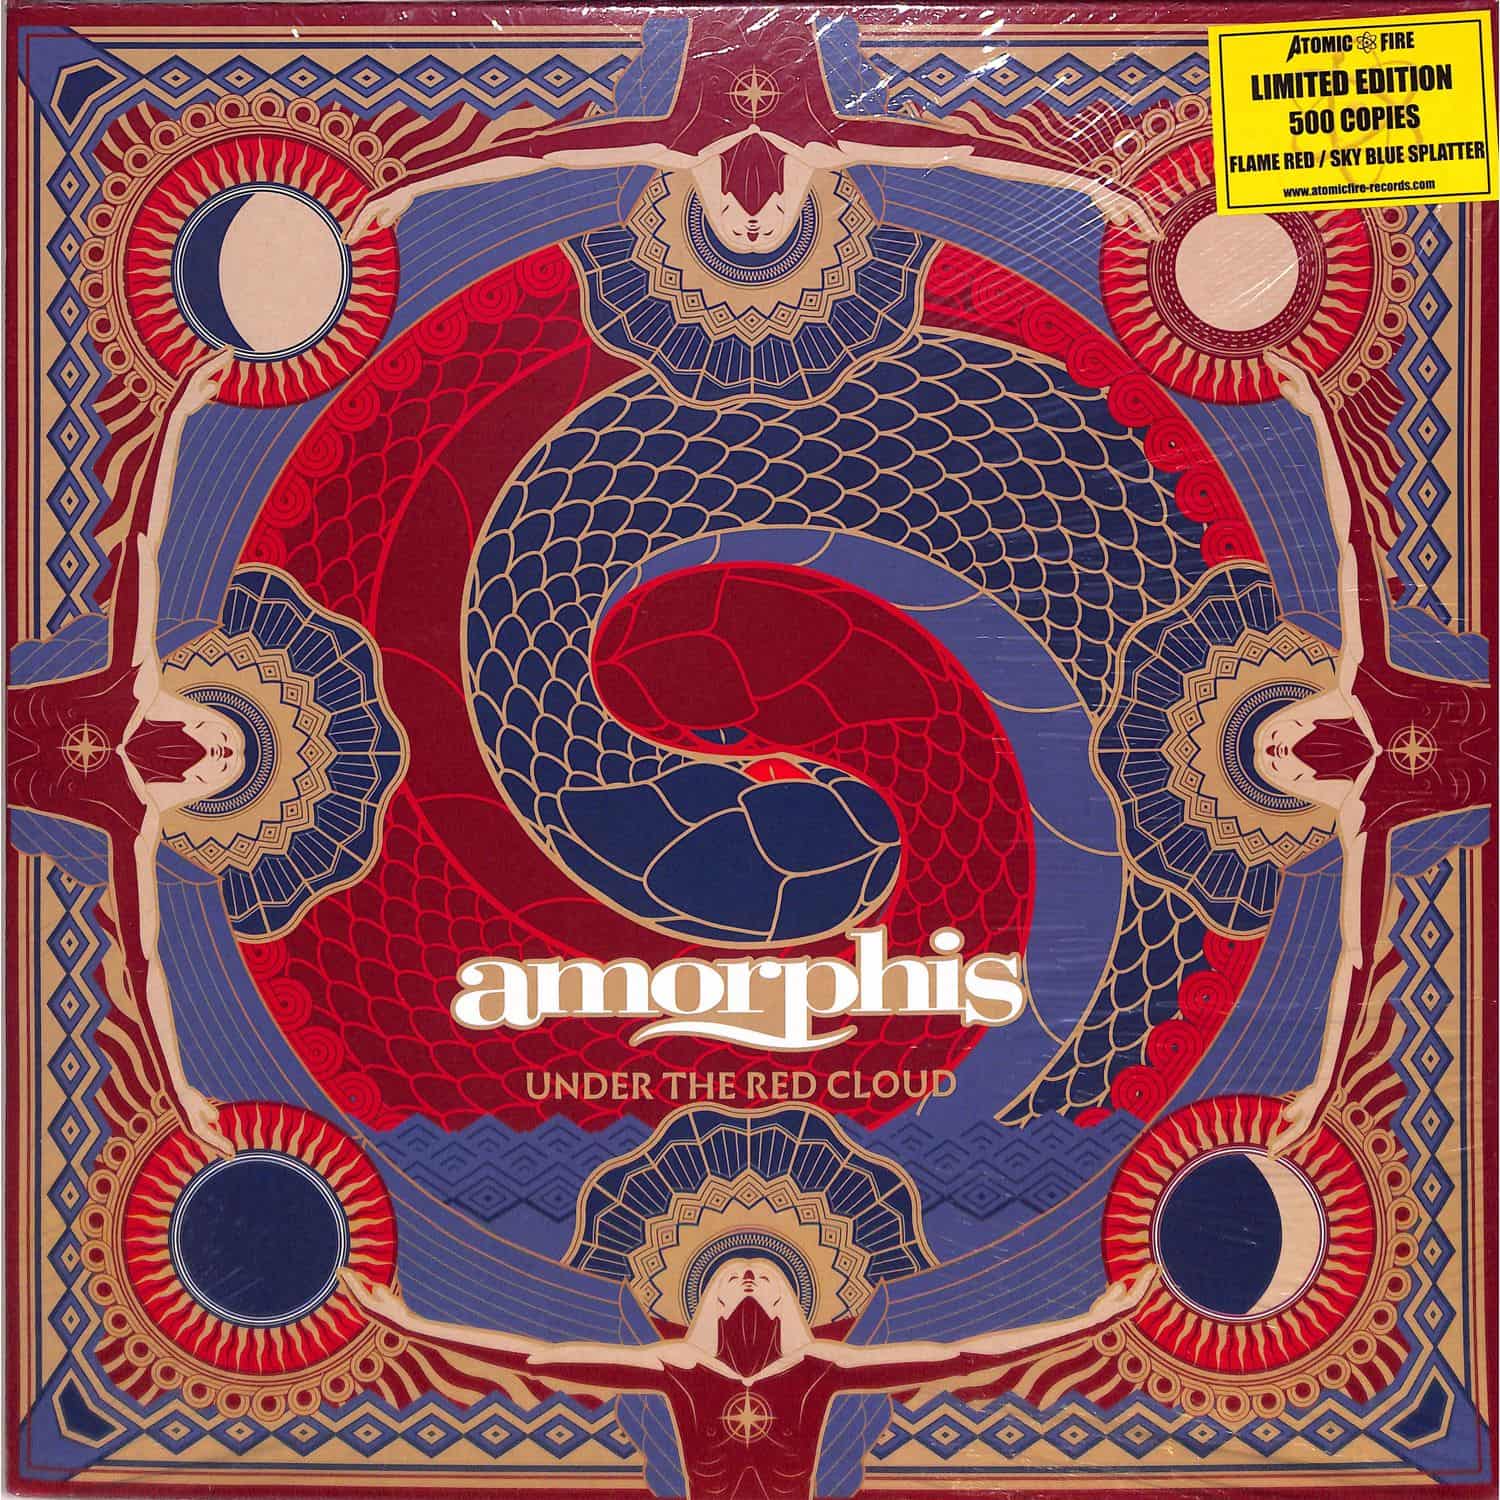 Amorphis - UNDER THE RED CLOUD 